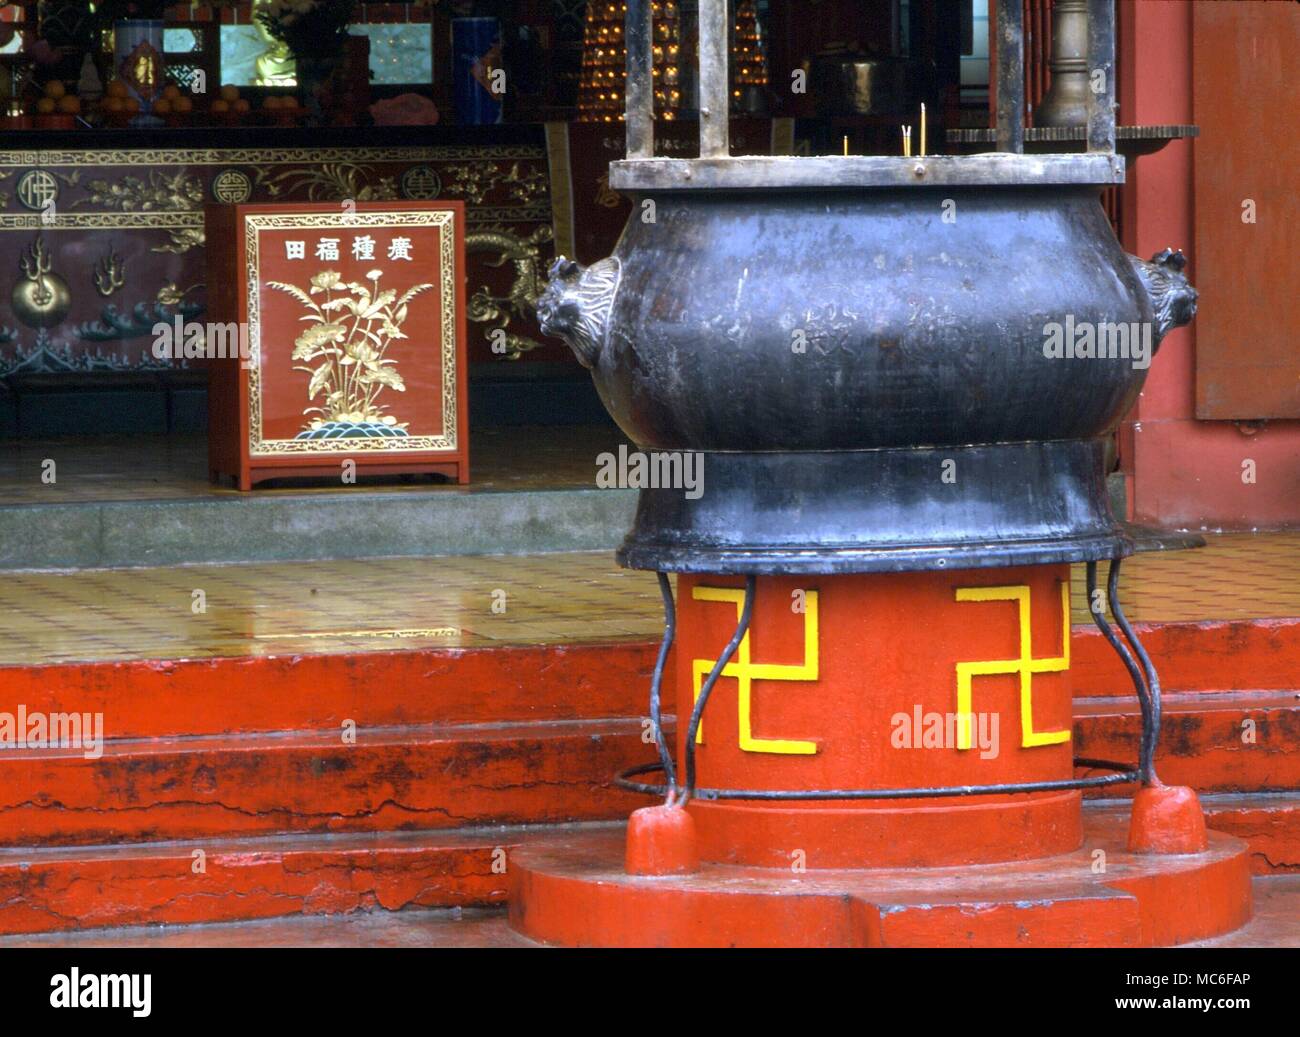 SWASTIKA Sauwastikas on the base of a large incense burner, in the courtyard of the Temple of the Thousand Buddhas, Sha Tin. (New Teritories) Stock Photo